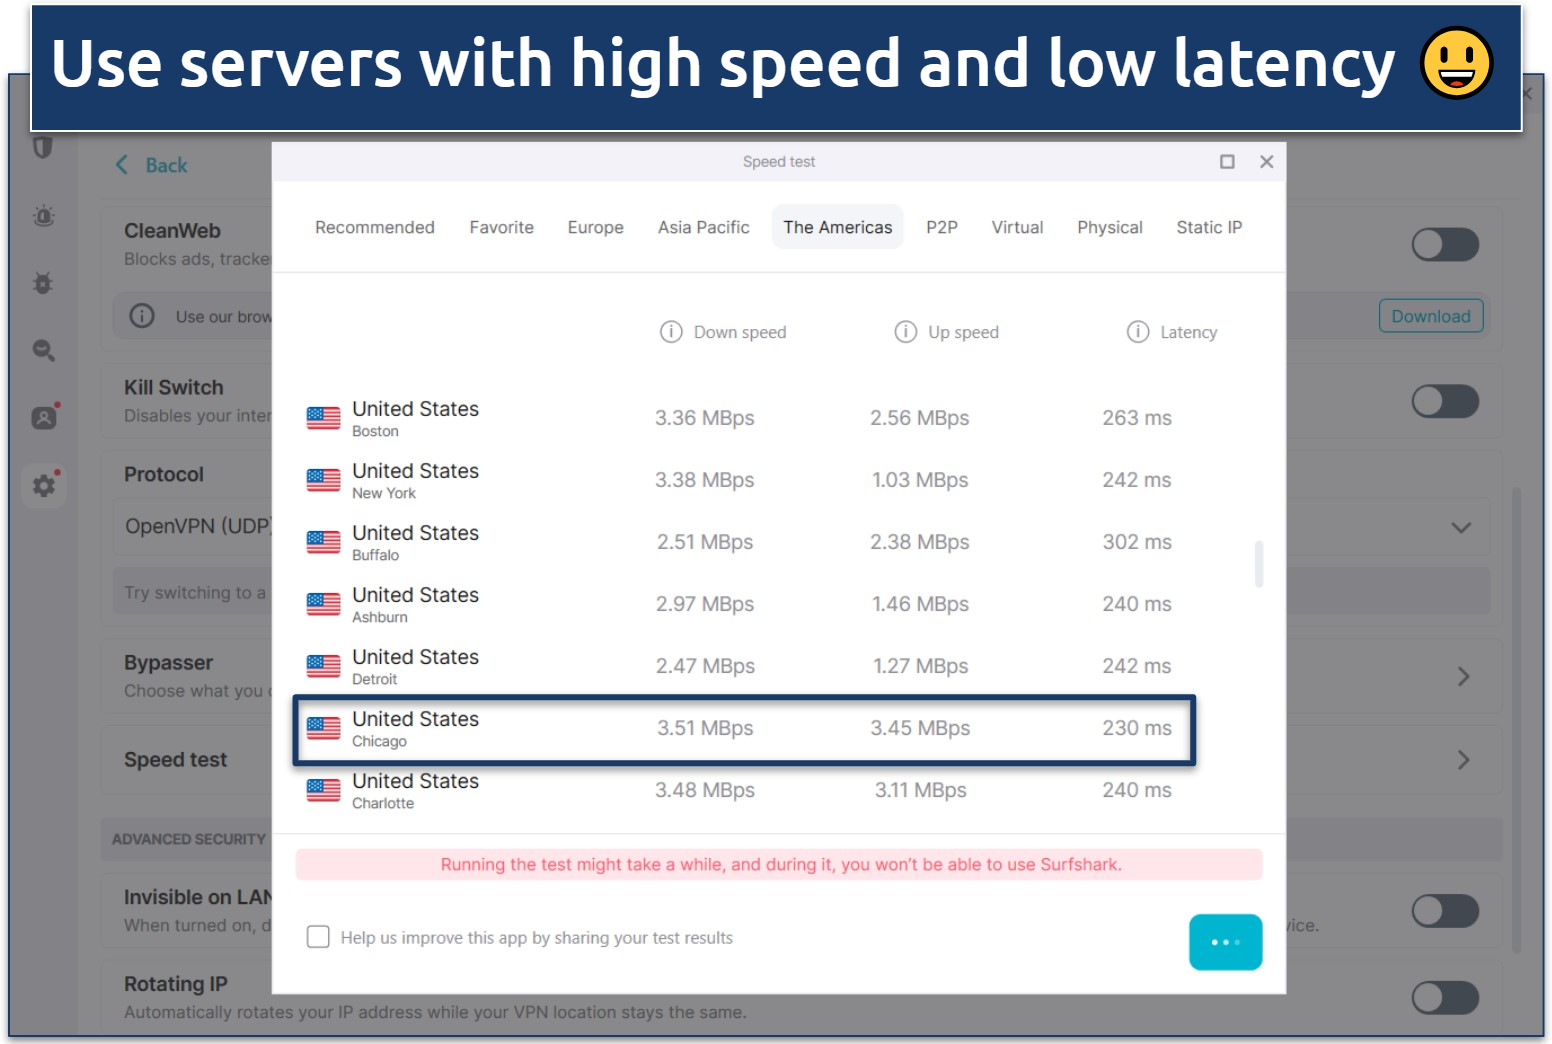 A screenshot of Surfshark's in-app speed test results for the US region.